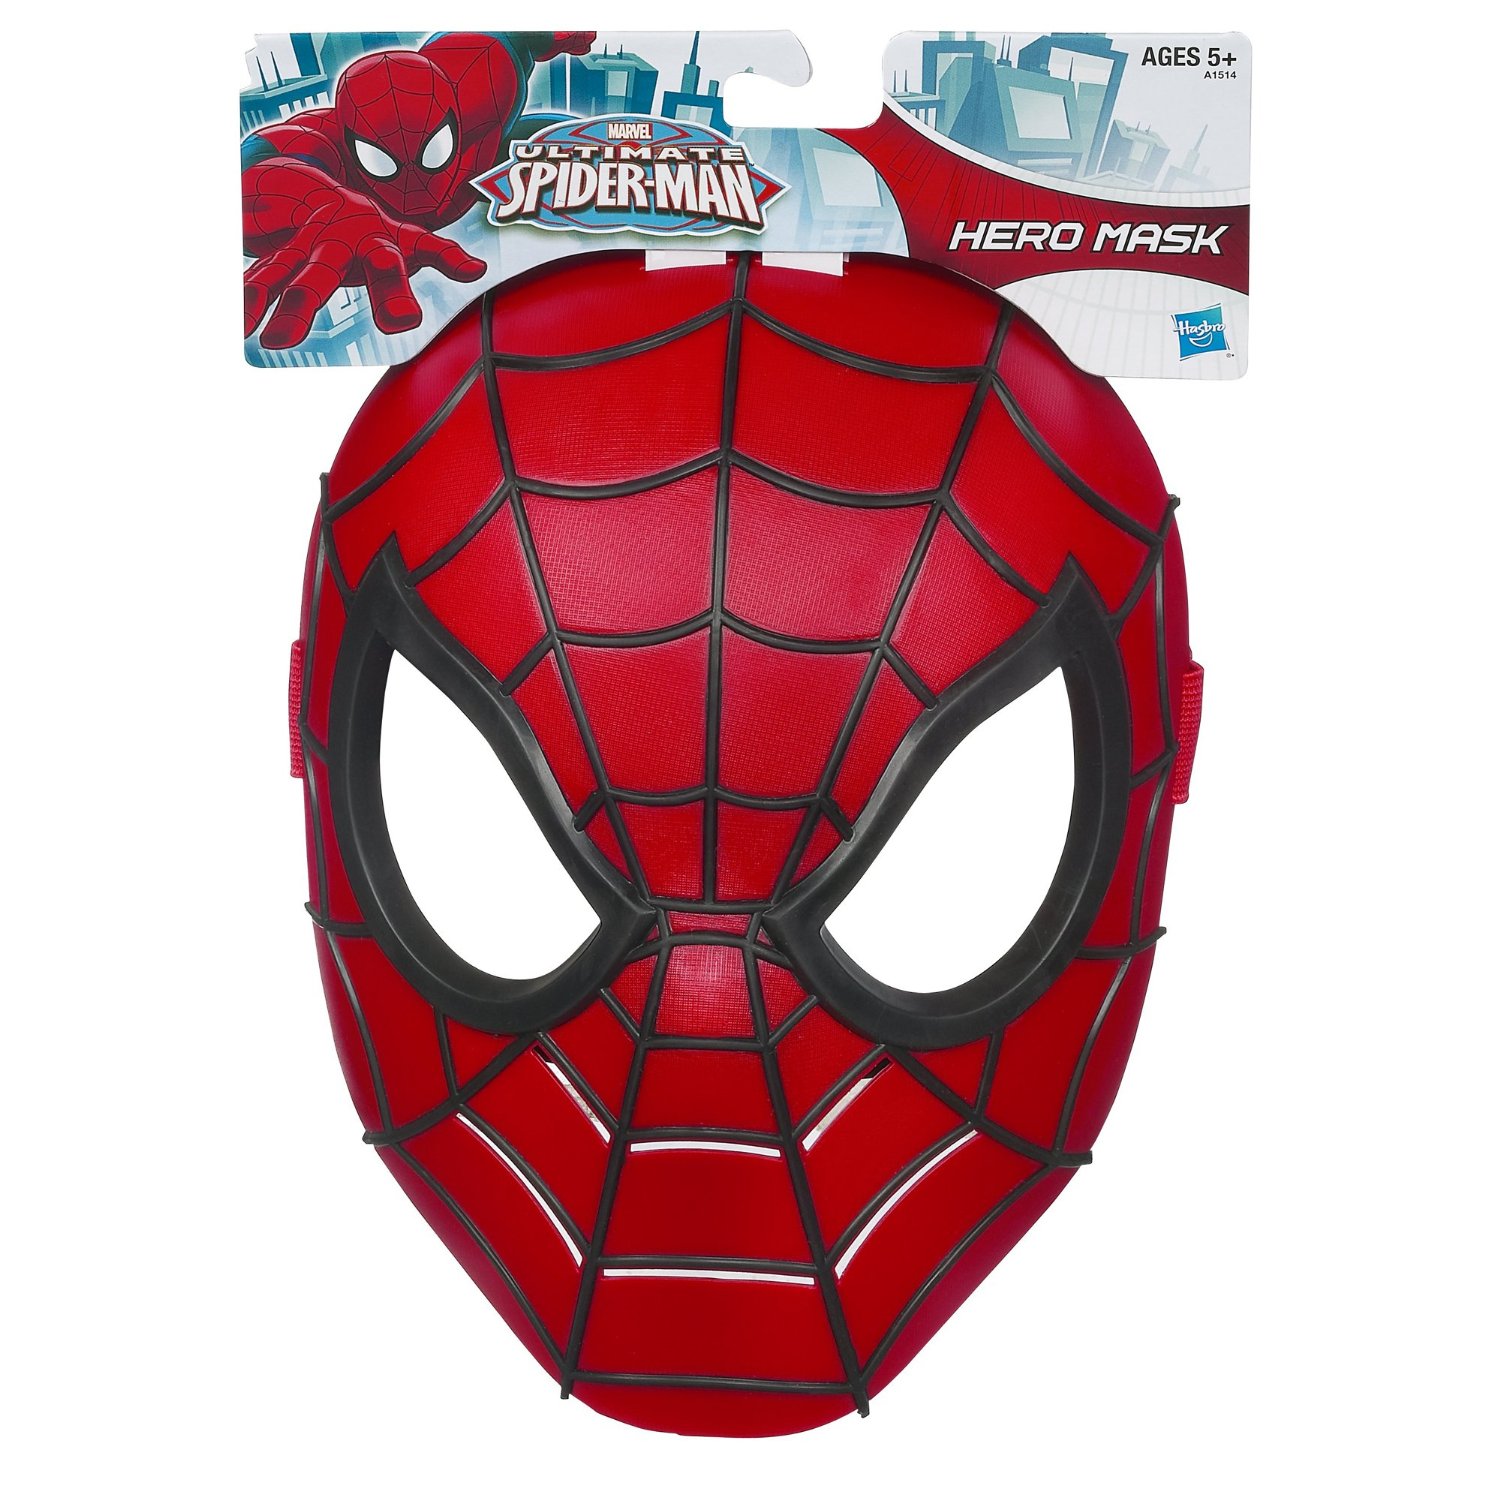 The Coolest Spiderman Toys You Can Get for Your Children